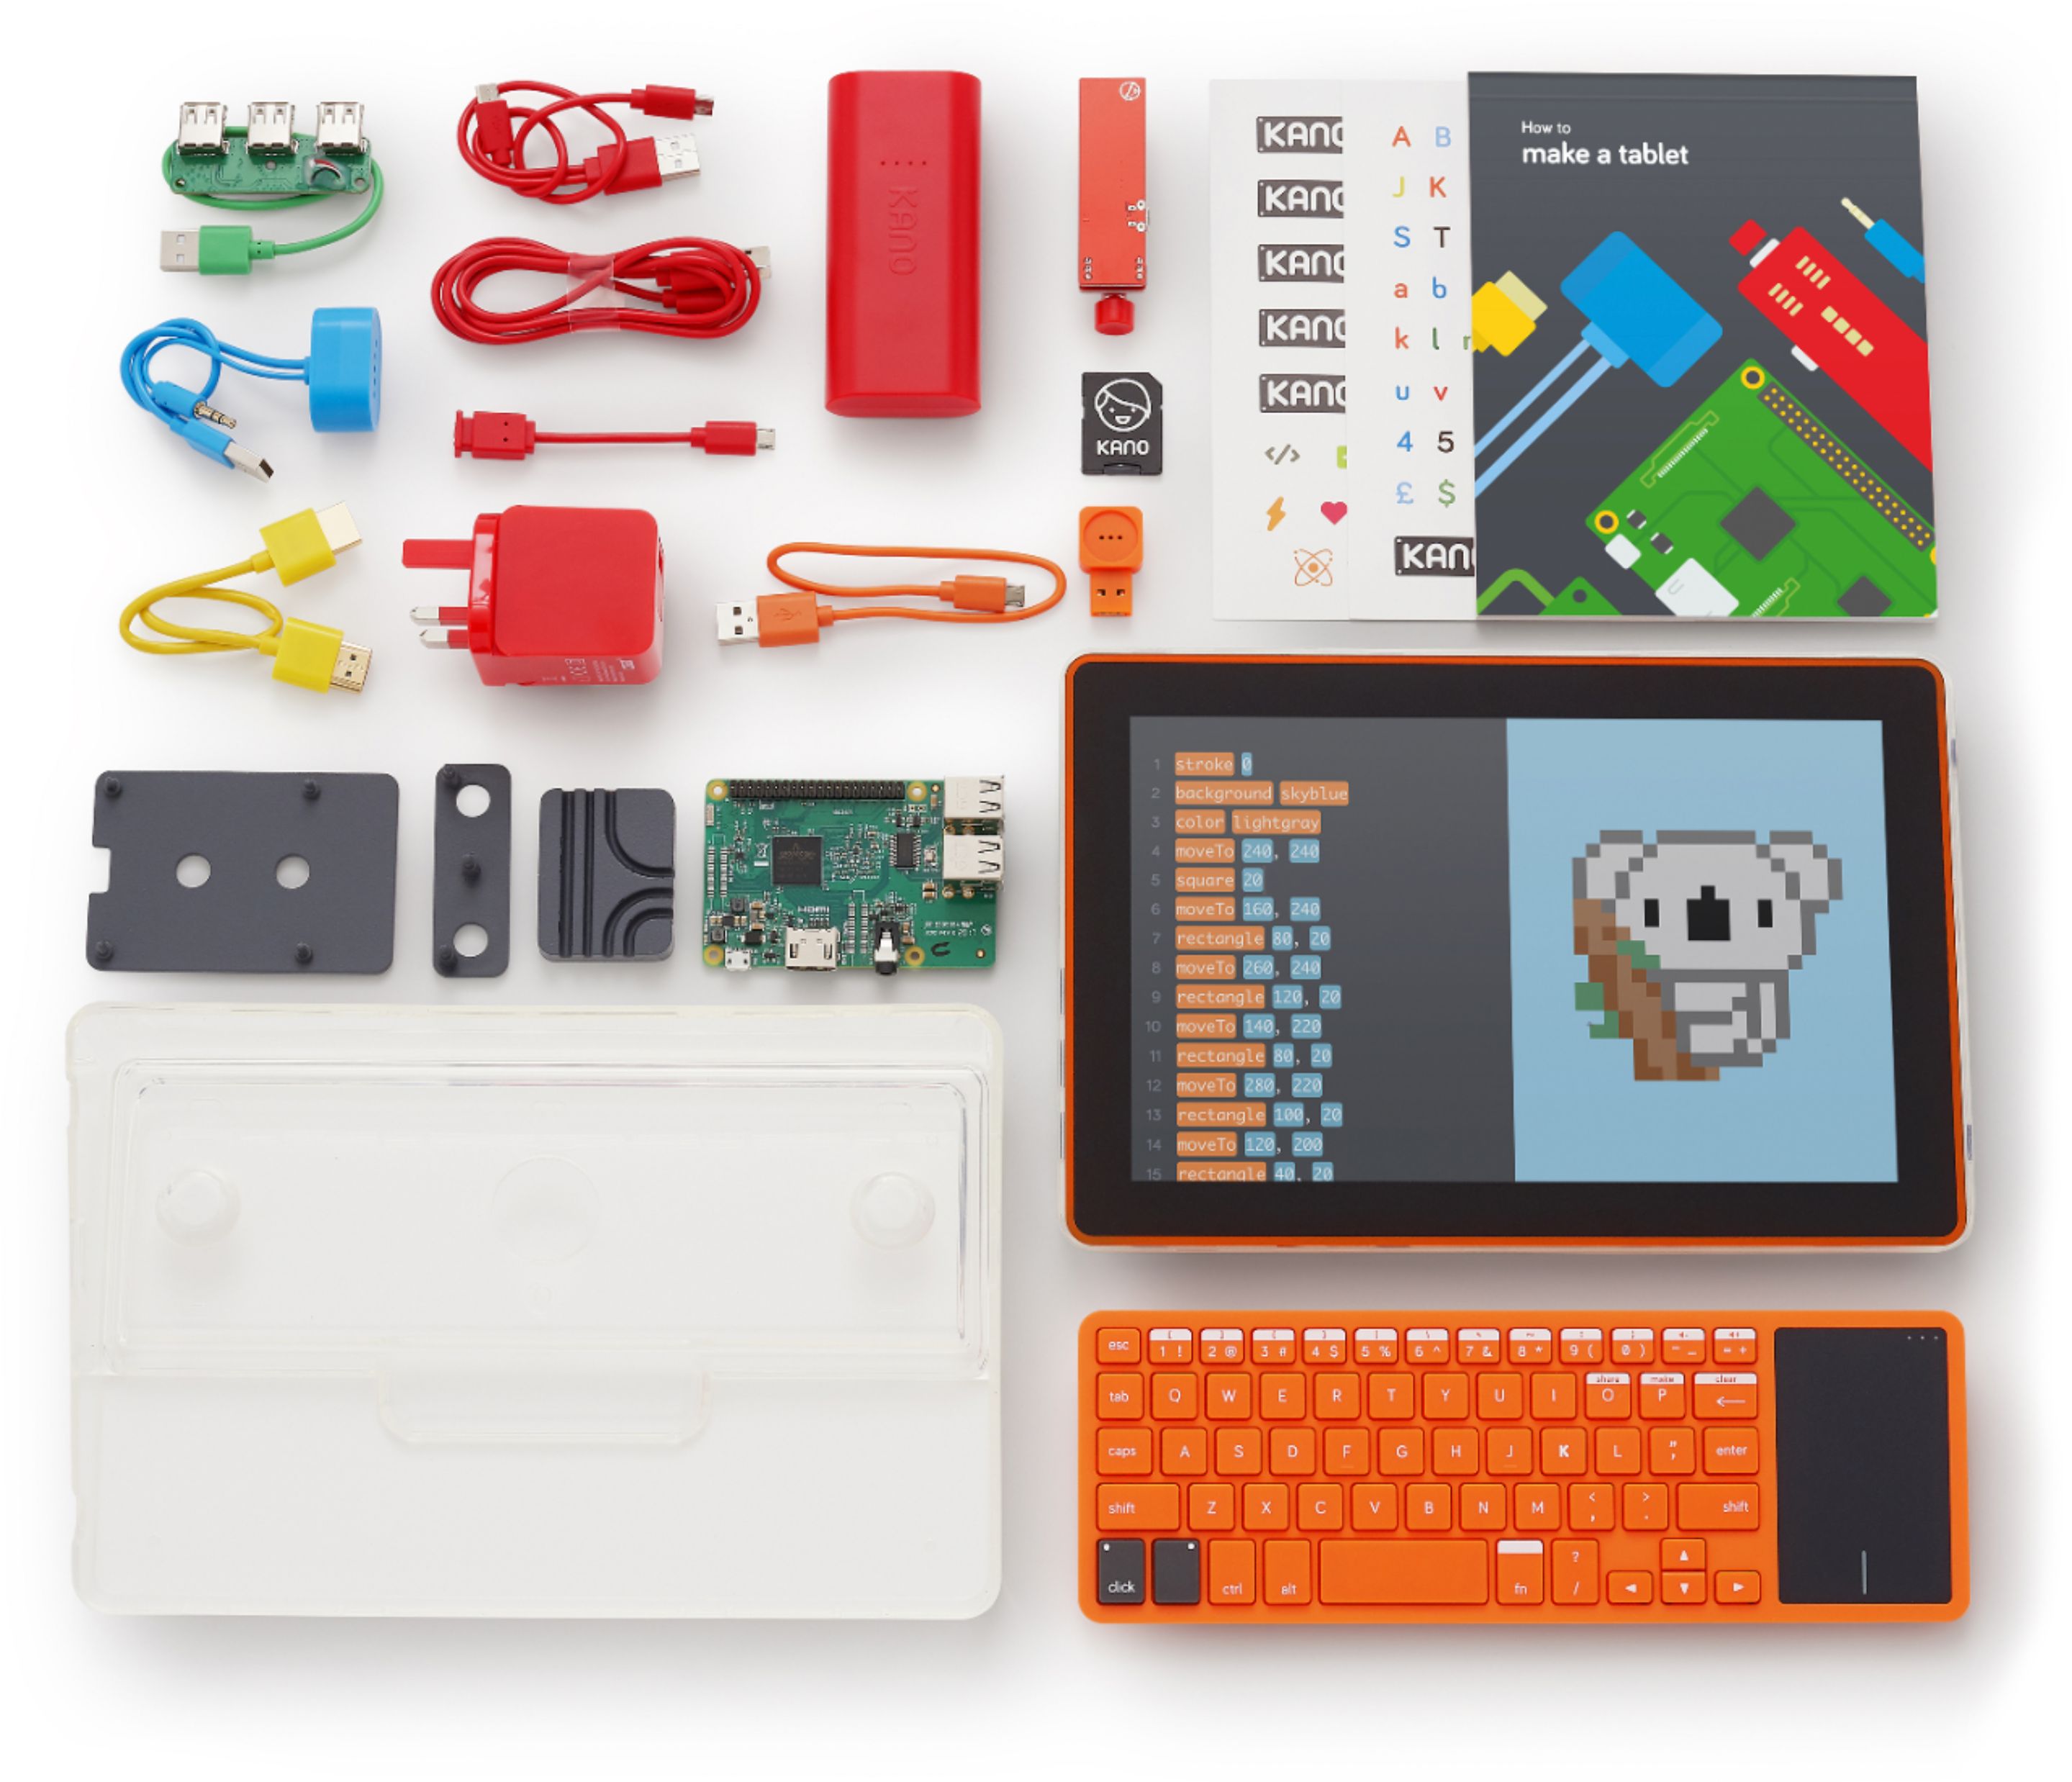 KANO COMPLETE COMPUTER KIT 1010-02 10.1" RASPBERRY PI 3 BUILD & CODE TABLET B